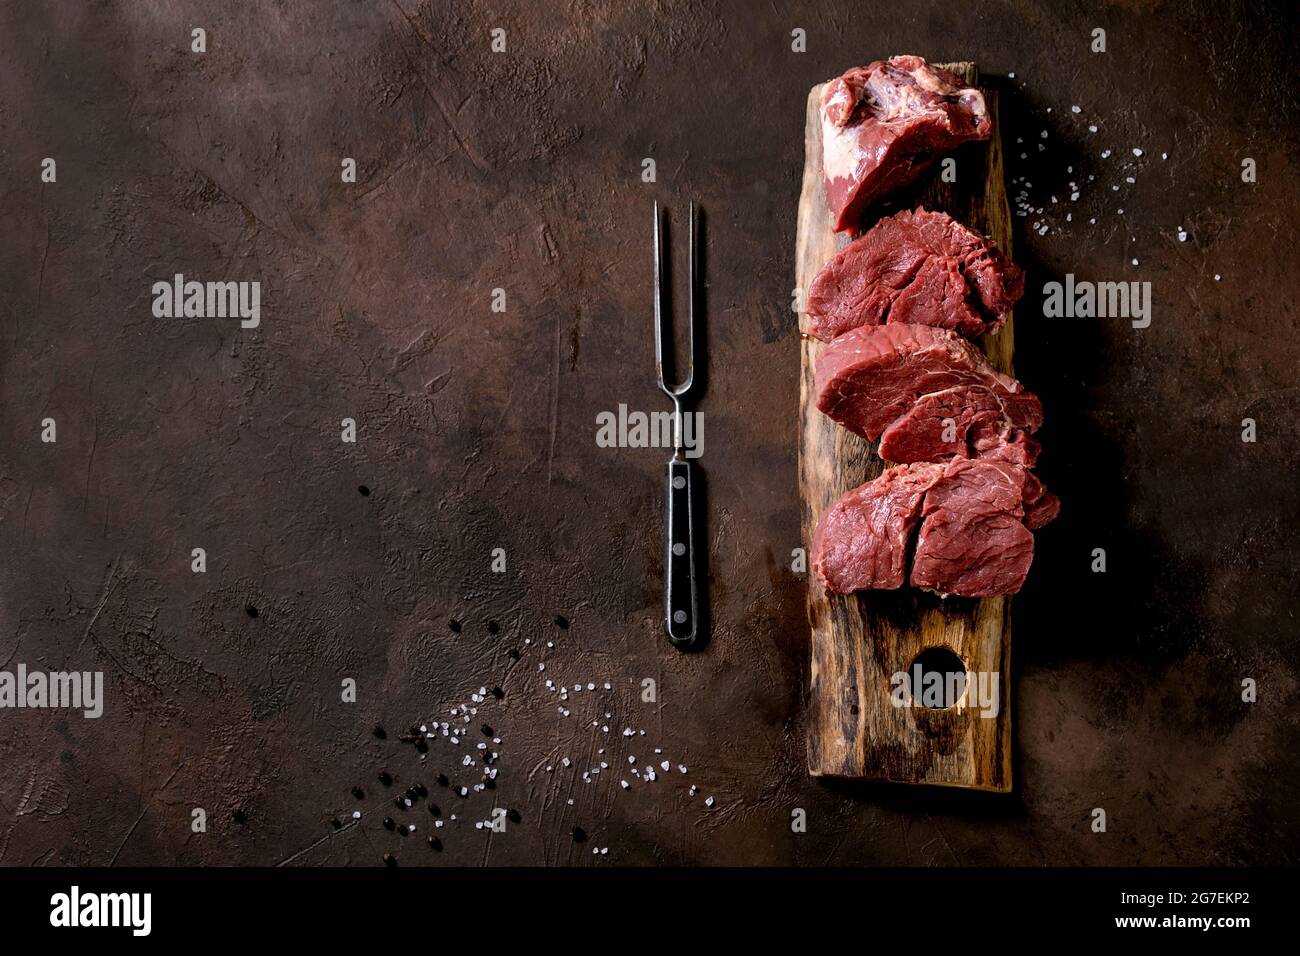 Fresh sliced raw beef tenderloin meat for steaks on wooden board with metal meat fork, salt, pepper over dark brown texture background. Food cooking b Stock Photo